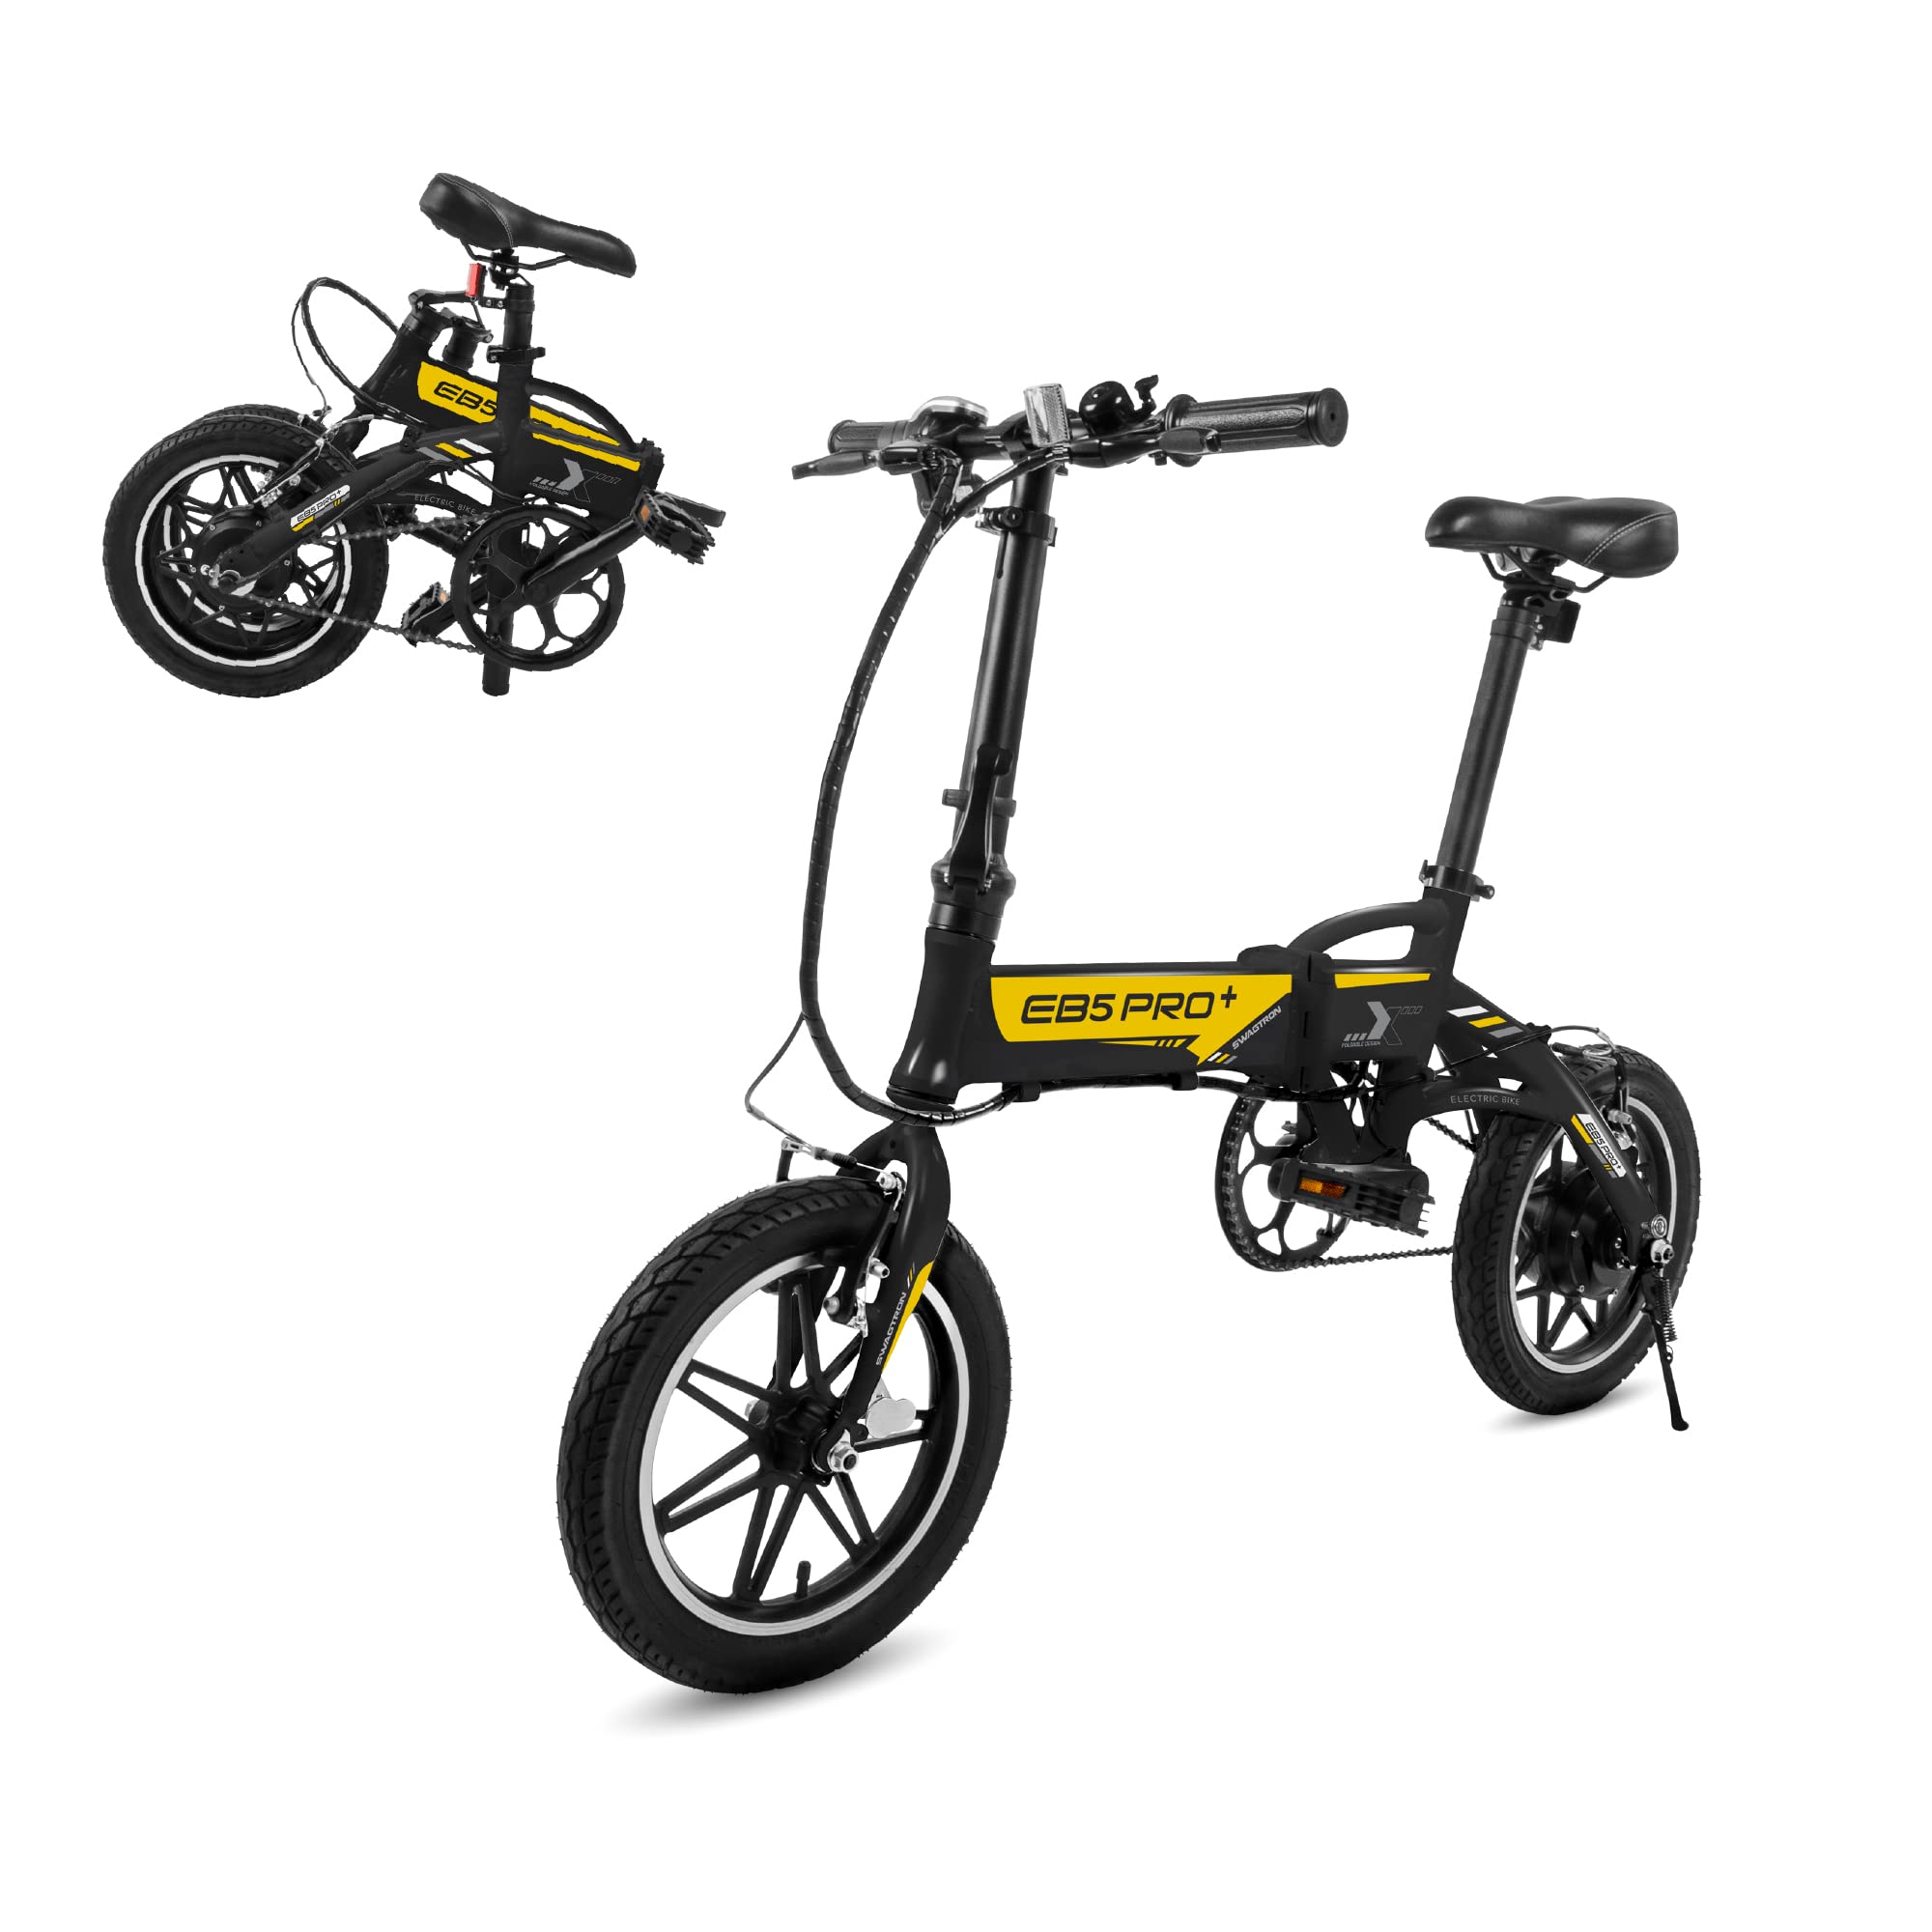 Swagtron Swagcycle EB-5 PLUS Folding Electric Bike with Pedals and Removable Battery Black 14 Wheels